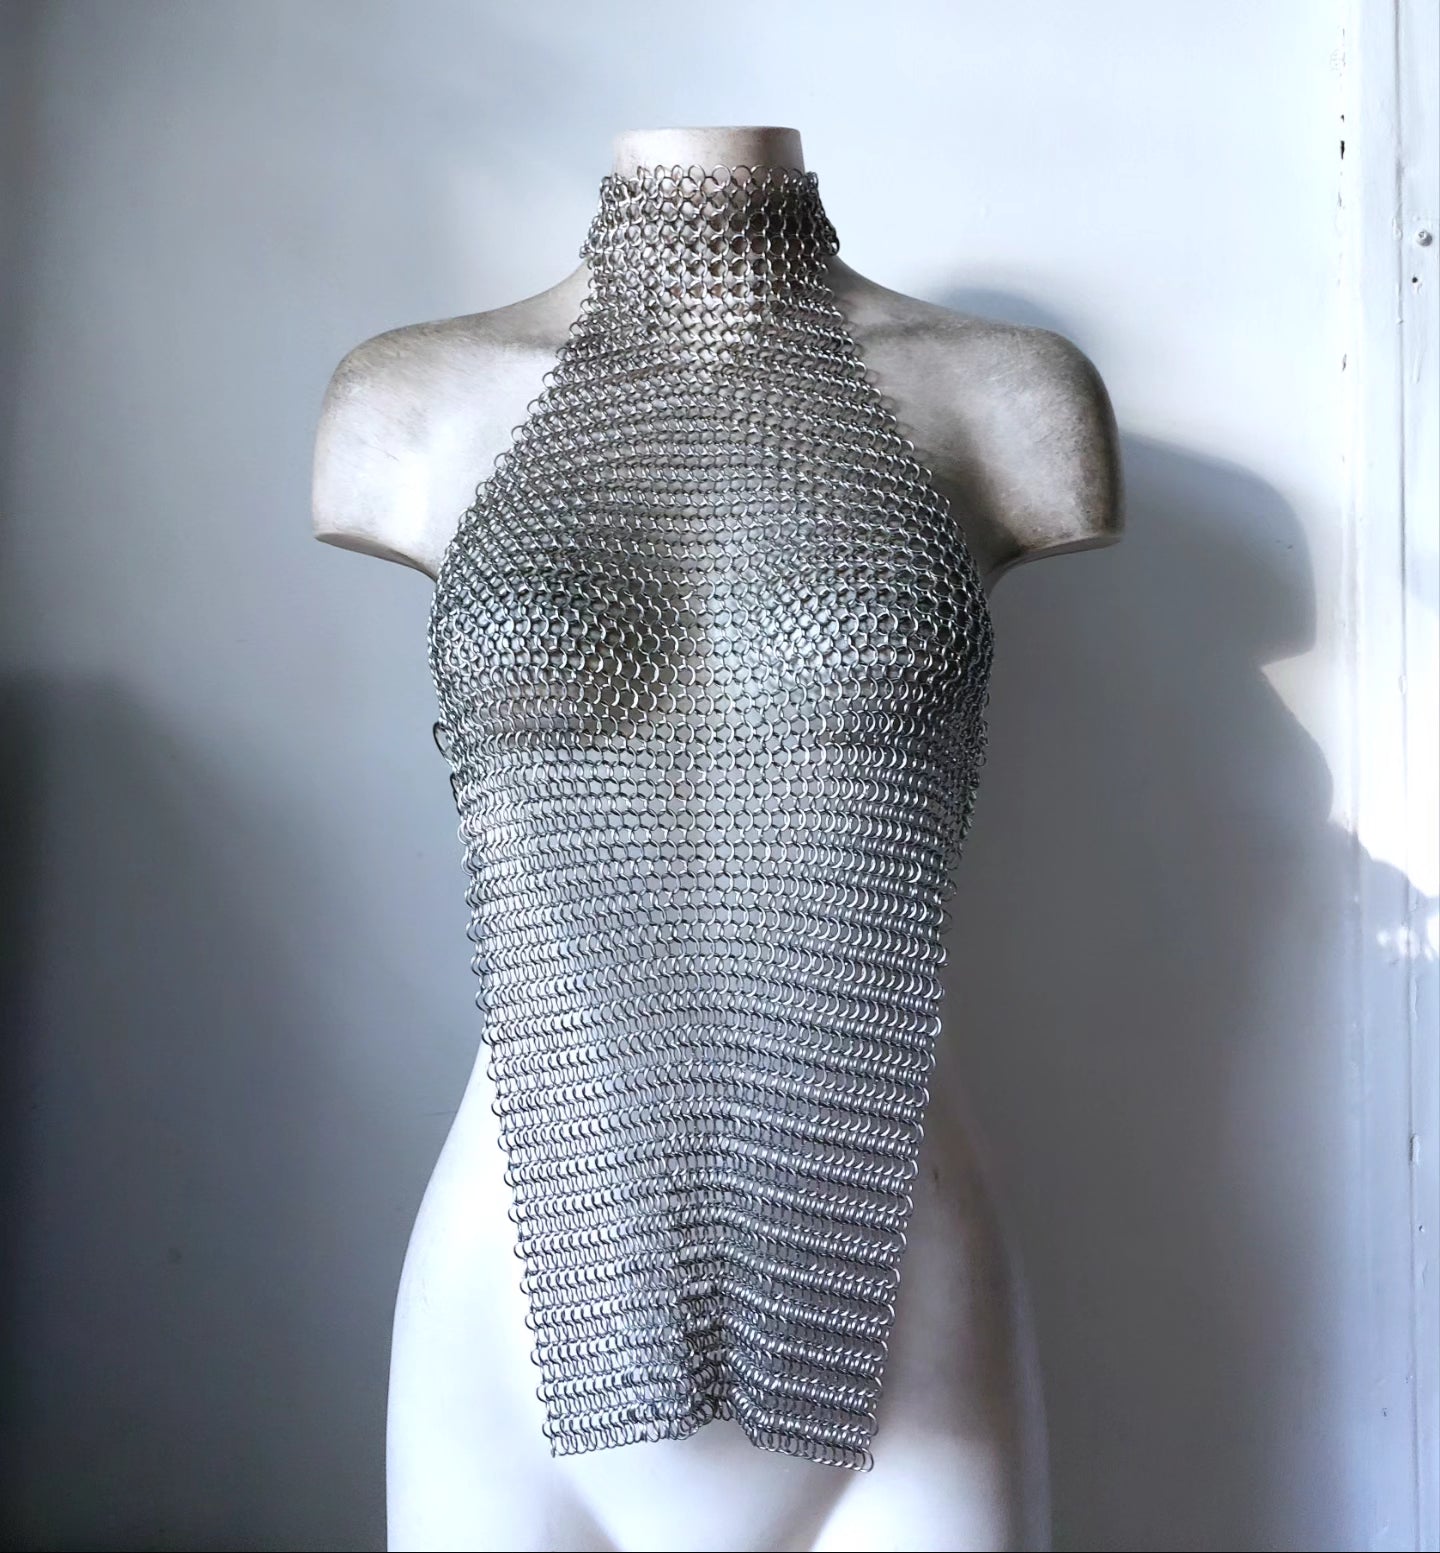 Dalena Top - Sleeveless High Neck Mesh Chainmail Top in Silver